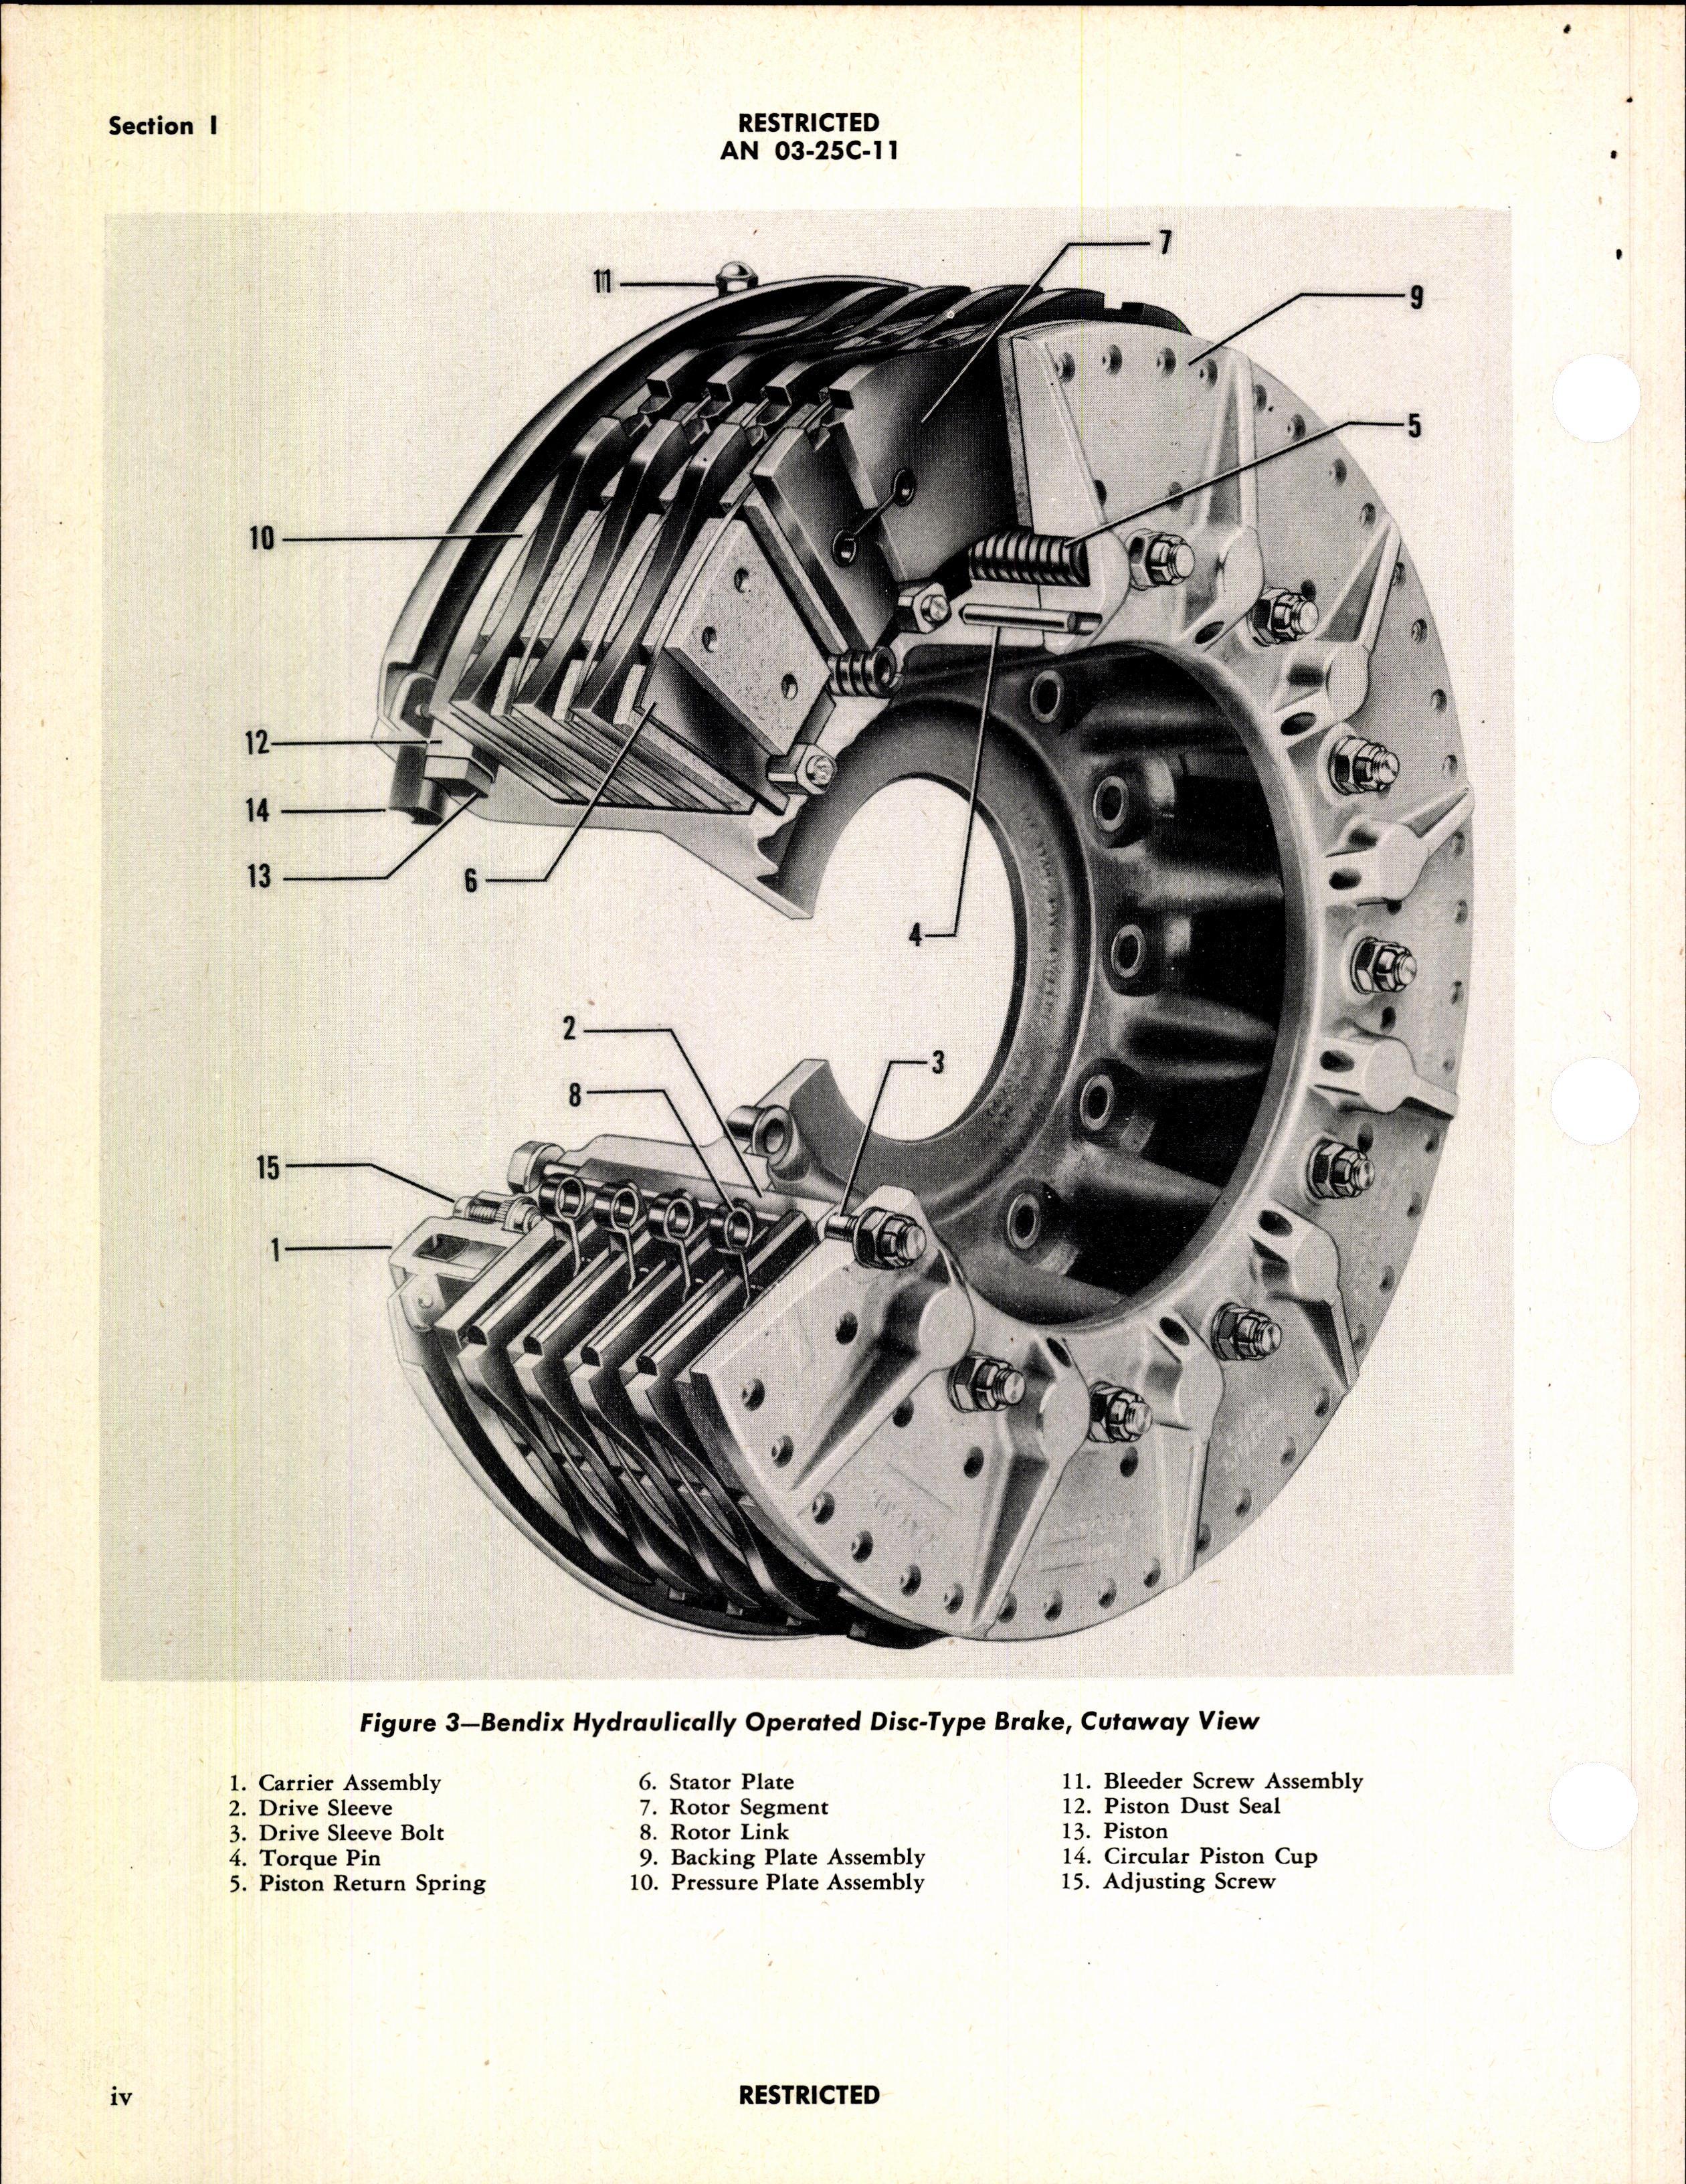 Sample page 12 from AirCorps Library document: Operation, Service and Overhaul Instructions with Parts Catalog for Multiple Disc Brakes